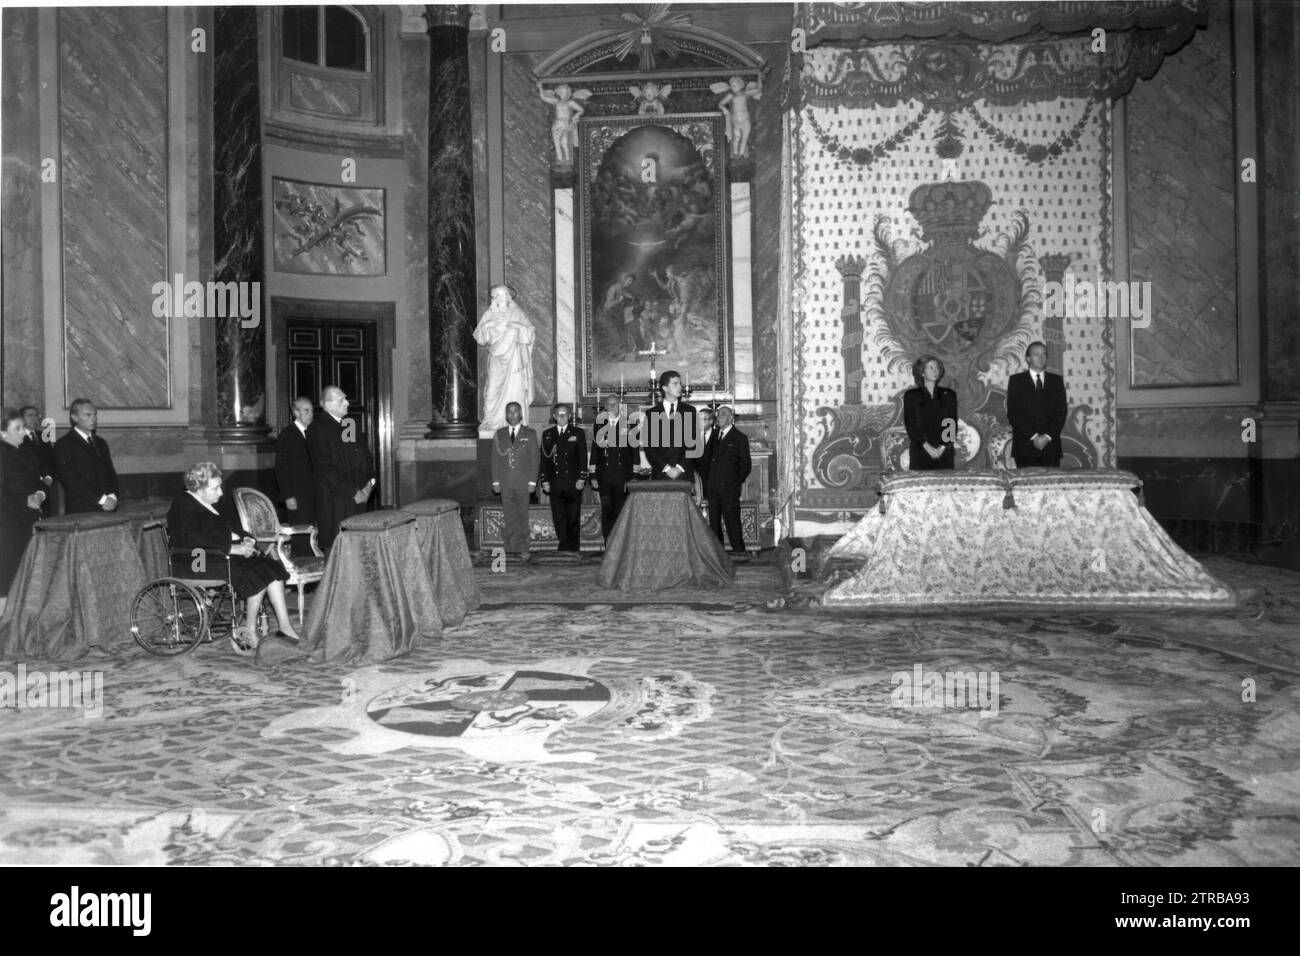 02/27/1991. The Kings preside, together with the Prince of Asturias and the Counts of Barcelona, on the 50th anniversary of the death of Alfonso XIII. Credit: Album / Archivo ABC / Jaime Pato Stock Photo